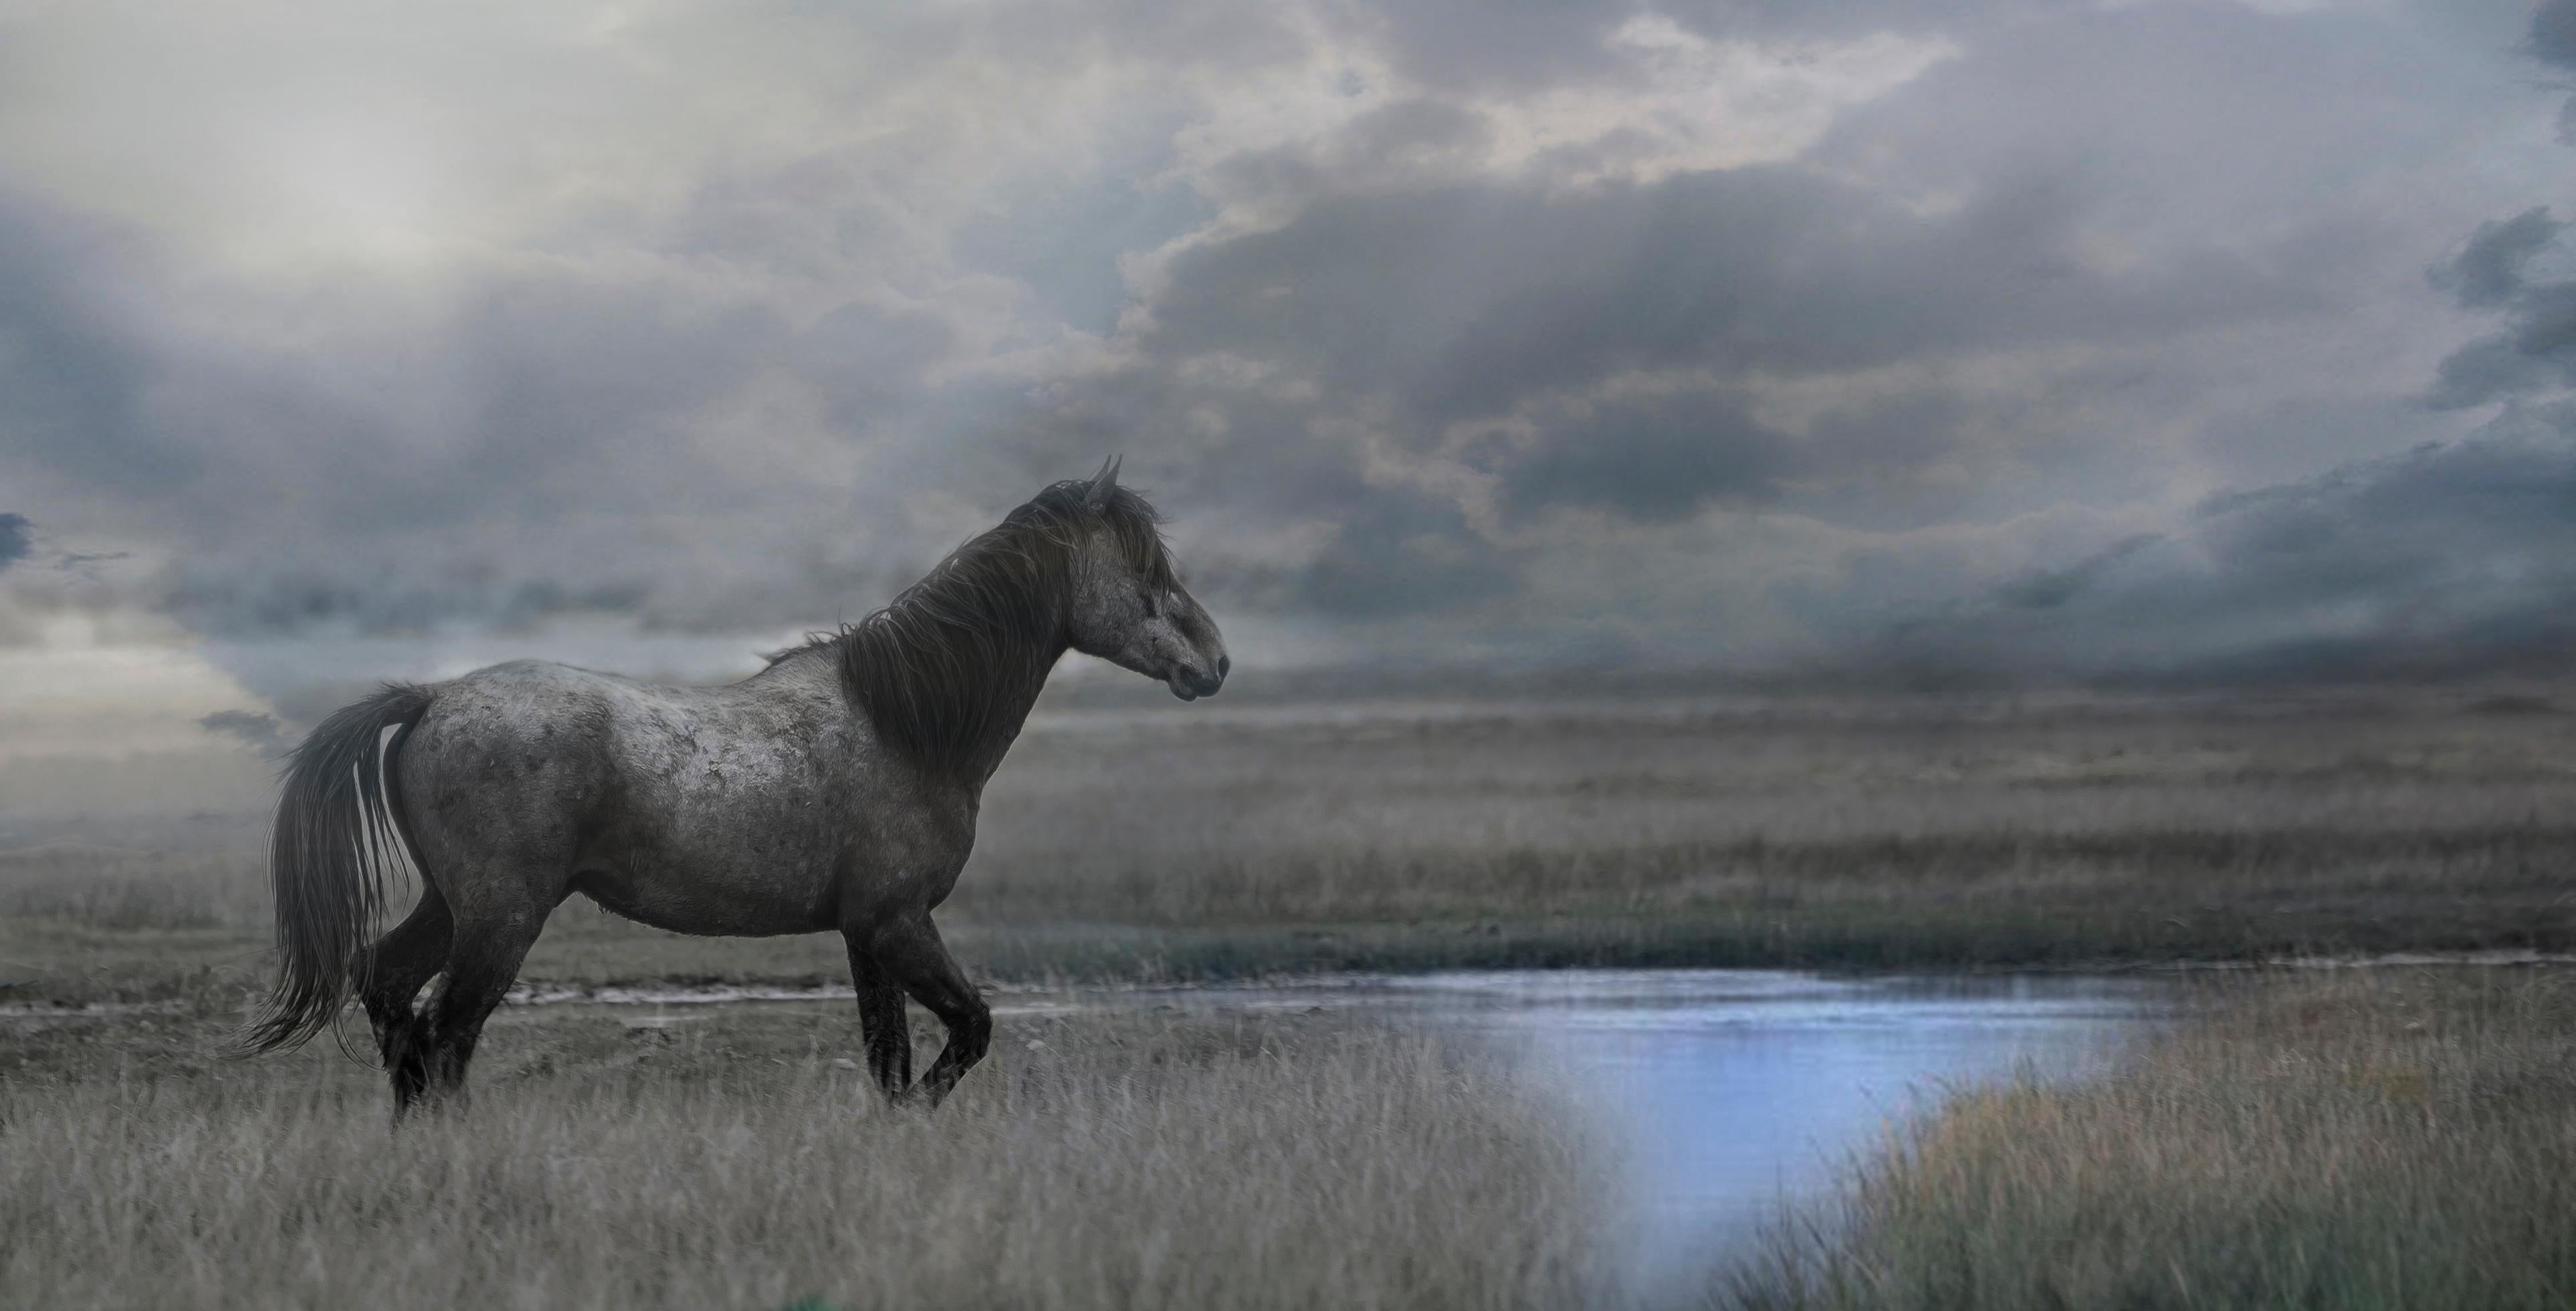 Shane Russeck Animal Print - Once Upon a Time in the West - 48x120  Photography Wild Horse Mustang Fine Art